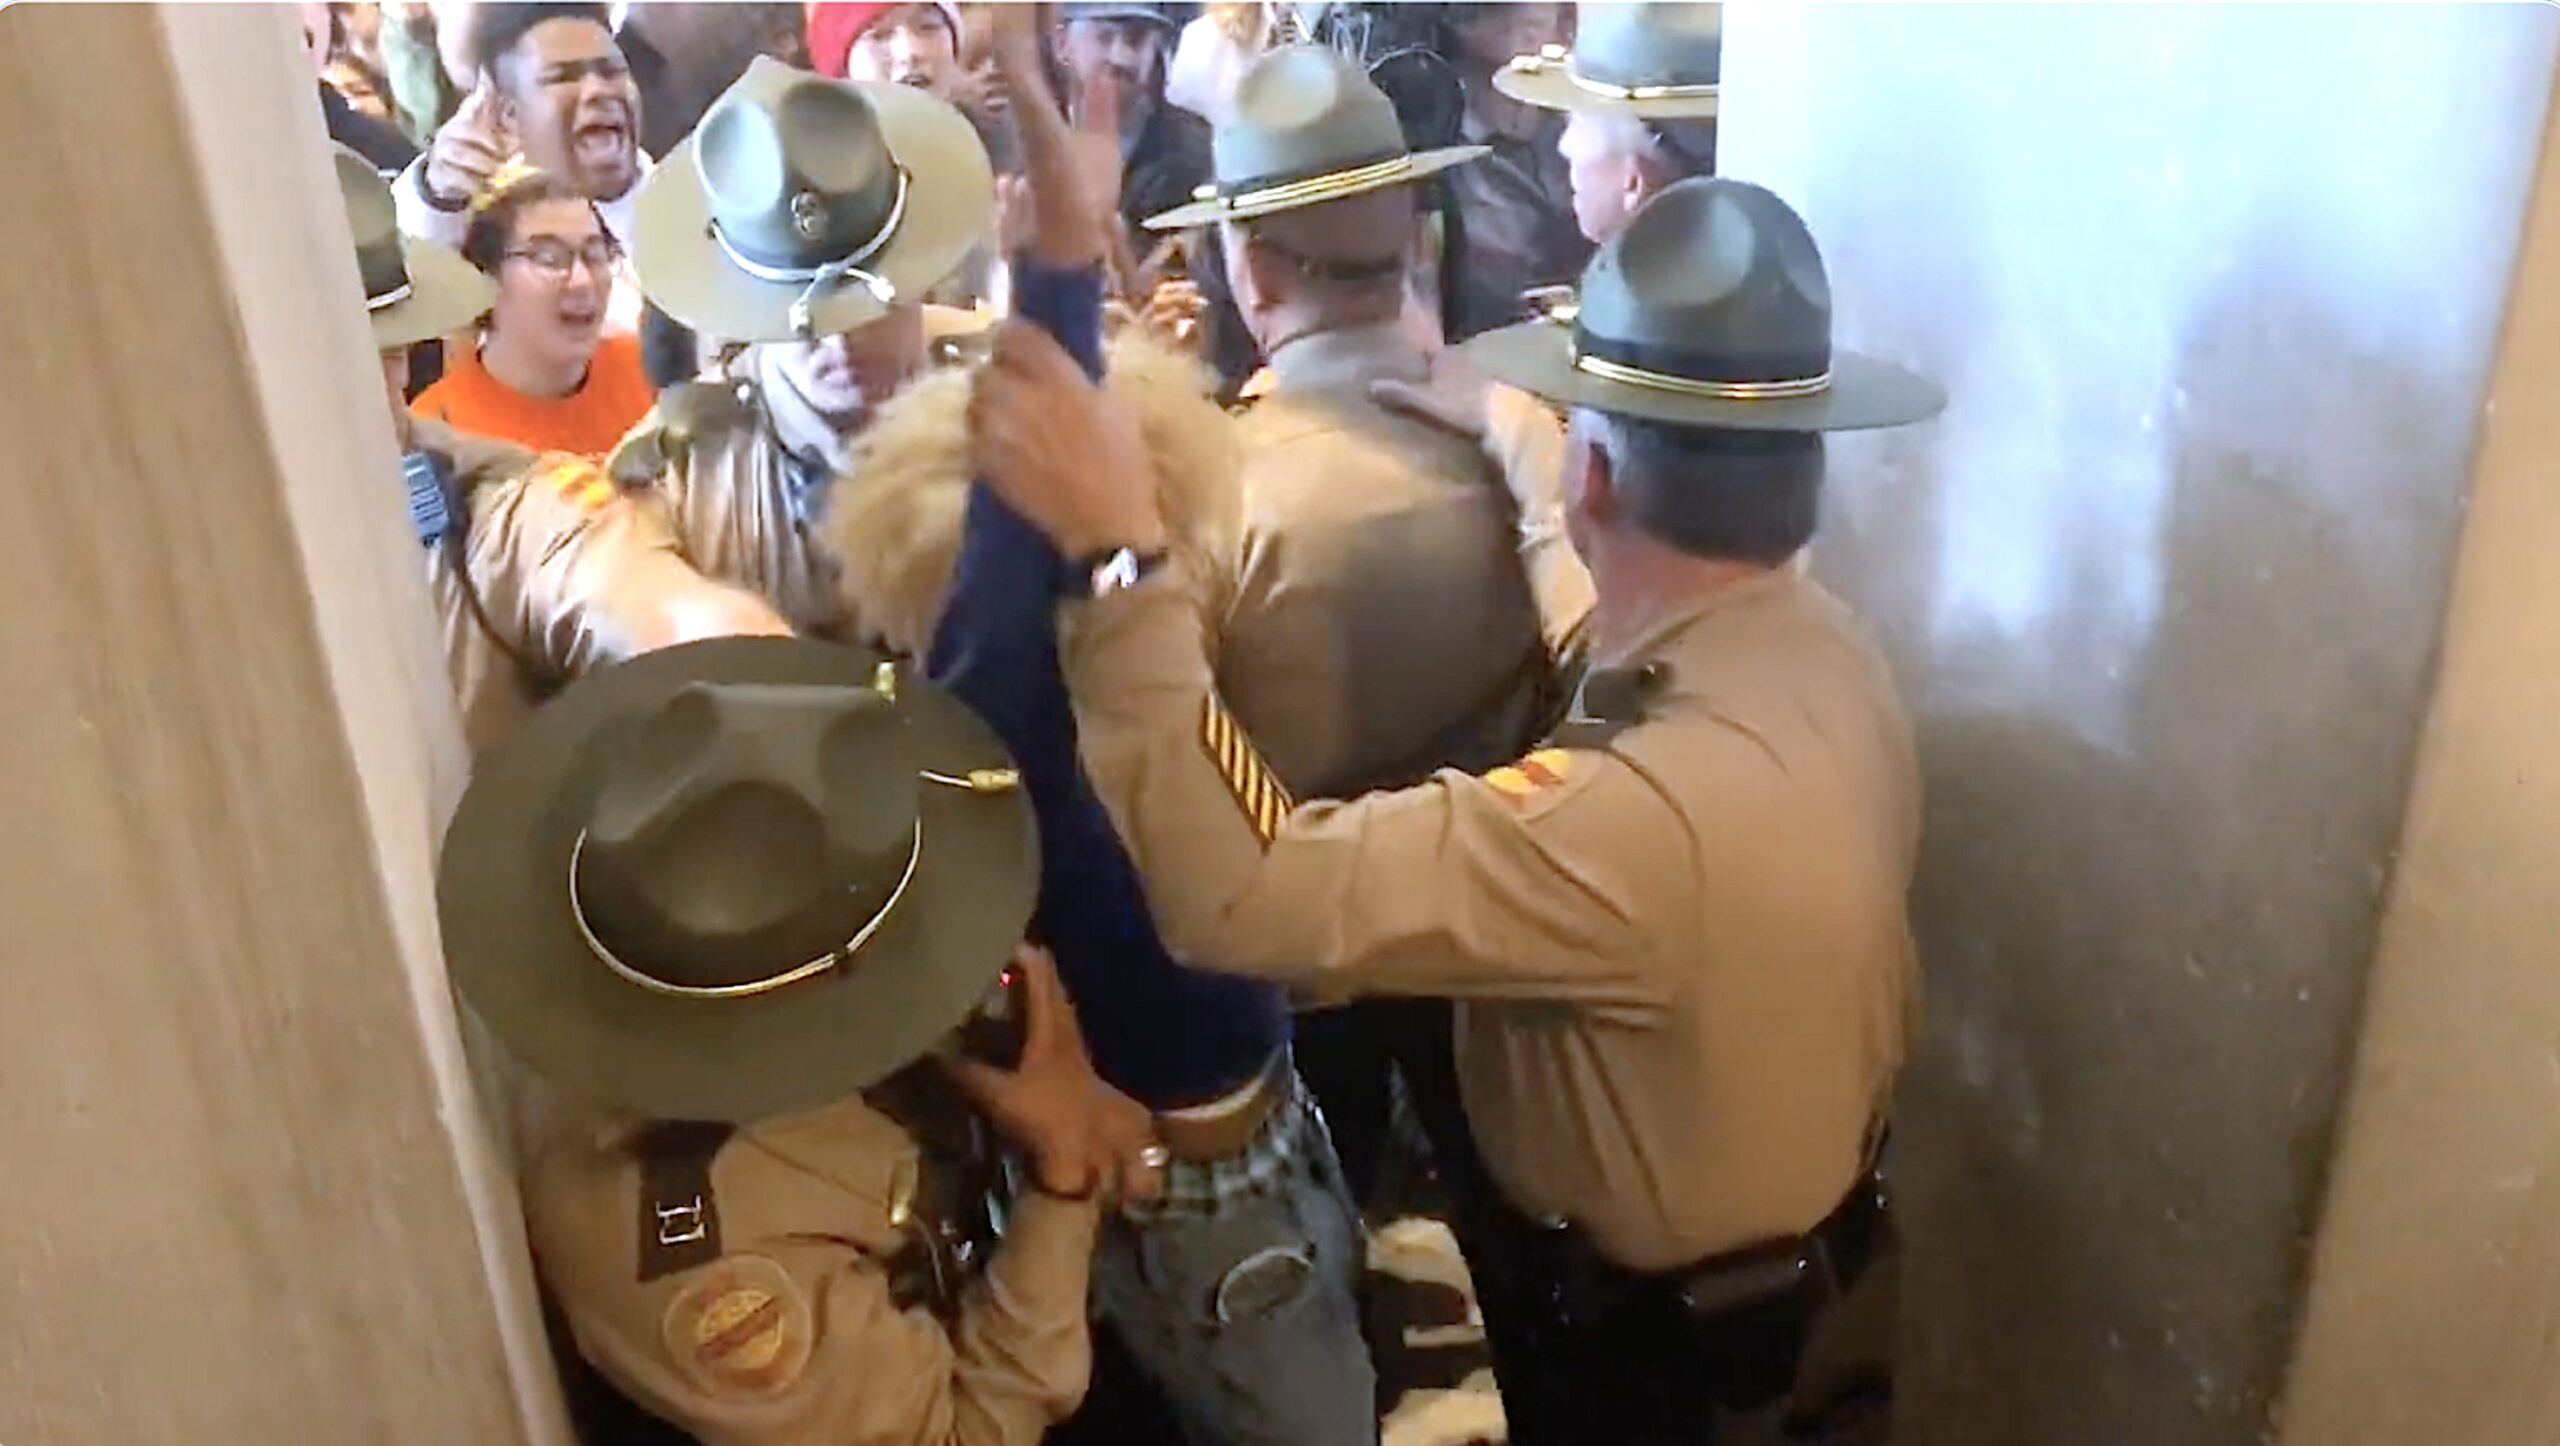 After Years Of J6 Fearmongering, Left-Wing Activists Storm Tennessee Capitol While DOJ Stays Silent 